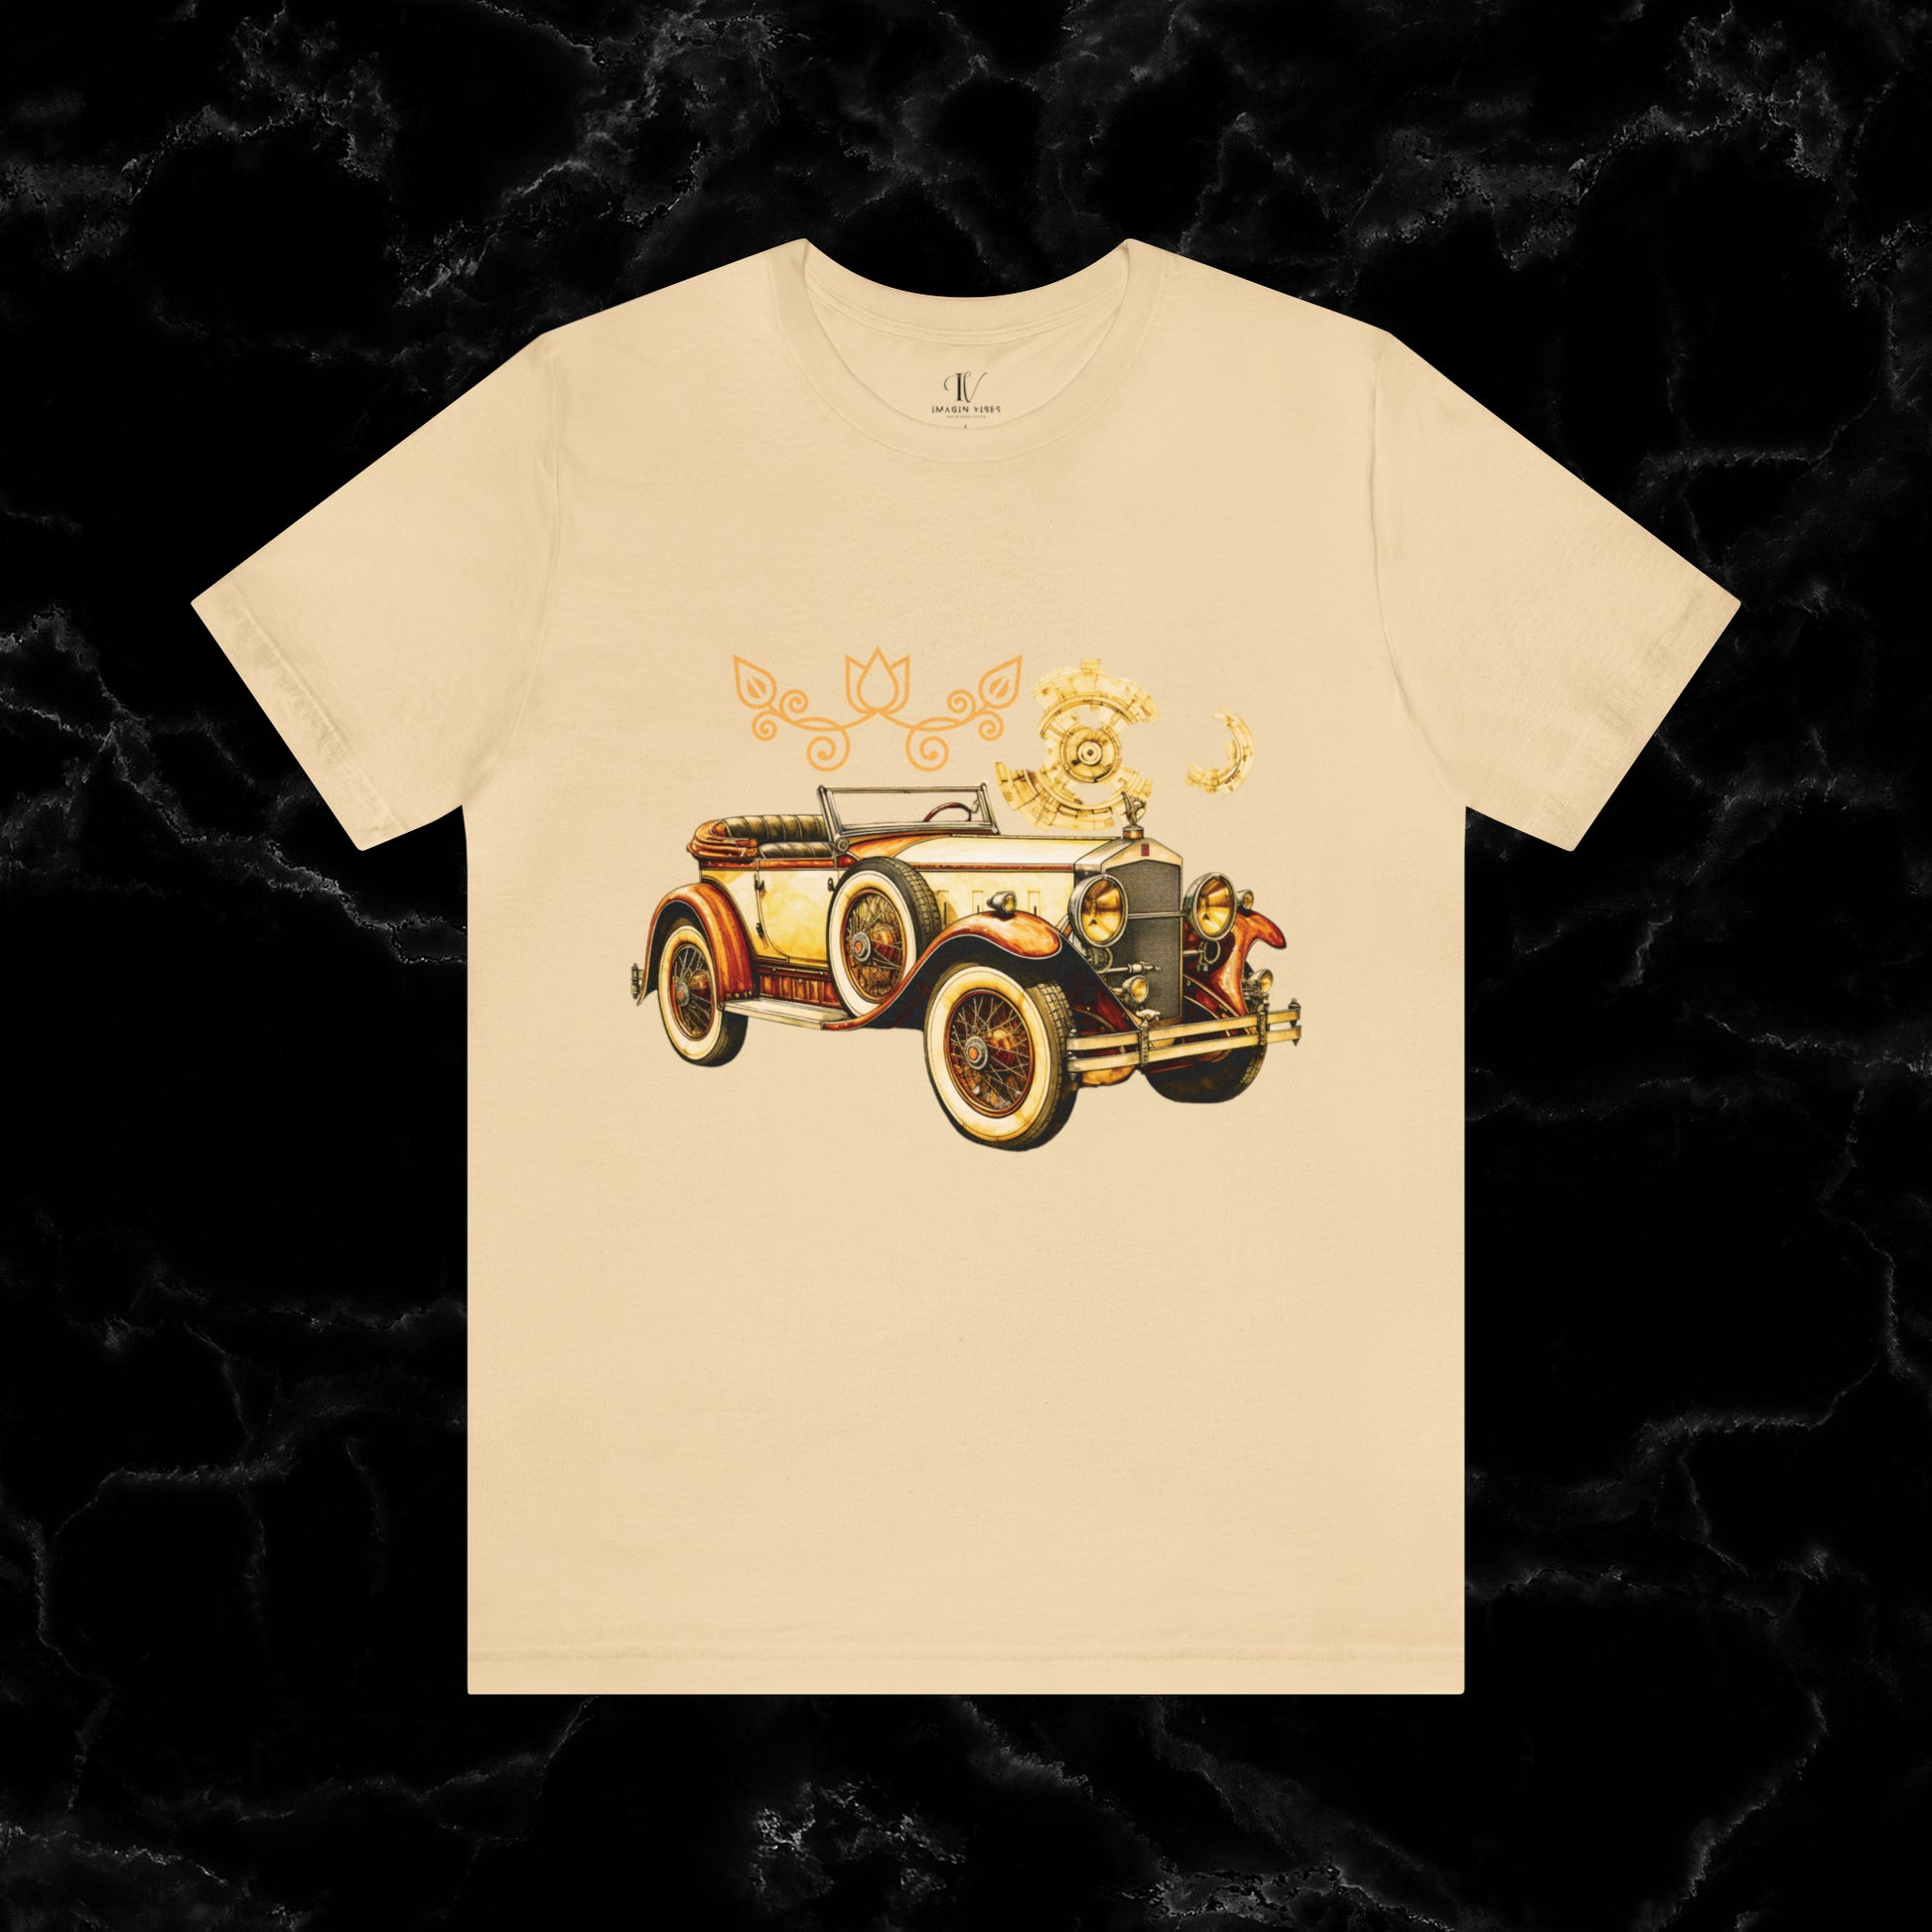 Vintage Car Enthusiast T-Shirt - Classic Wheels and Timeless Appeal for Automotive Enthusiast T-Shirt Soft Cream S 